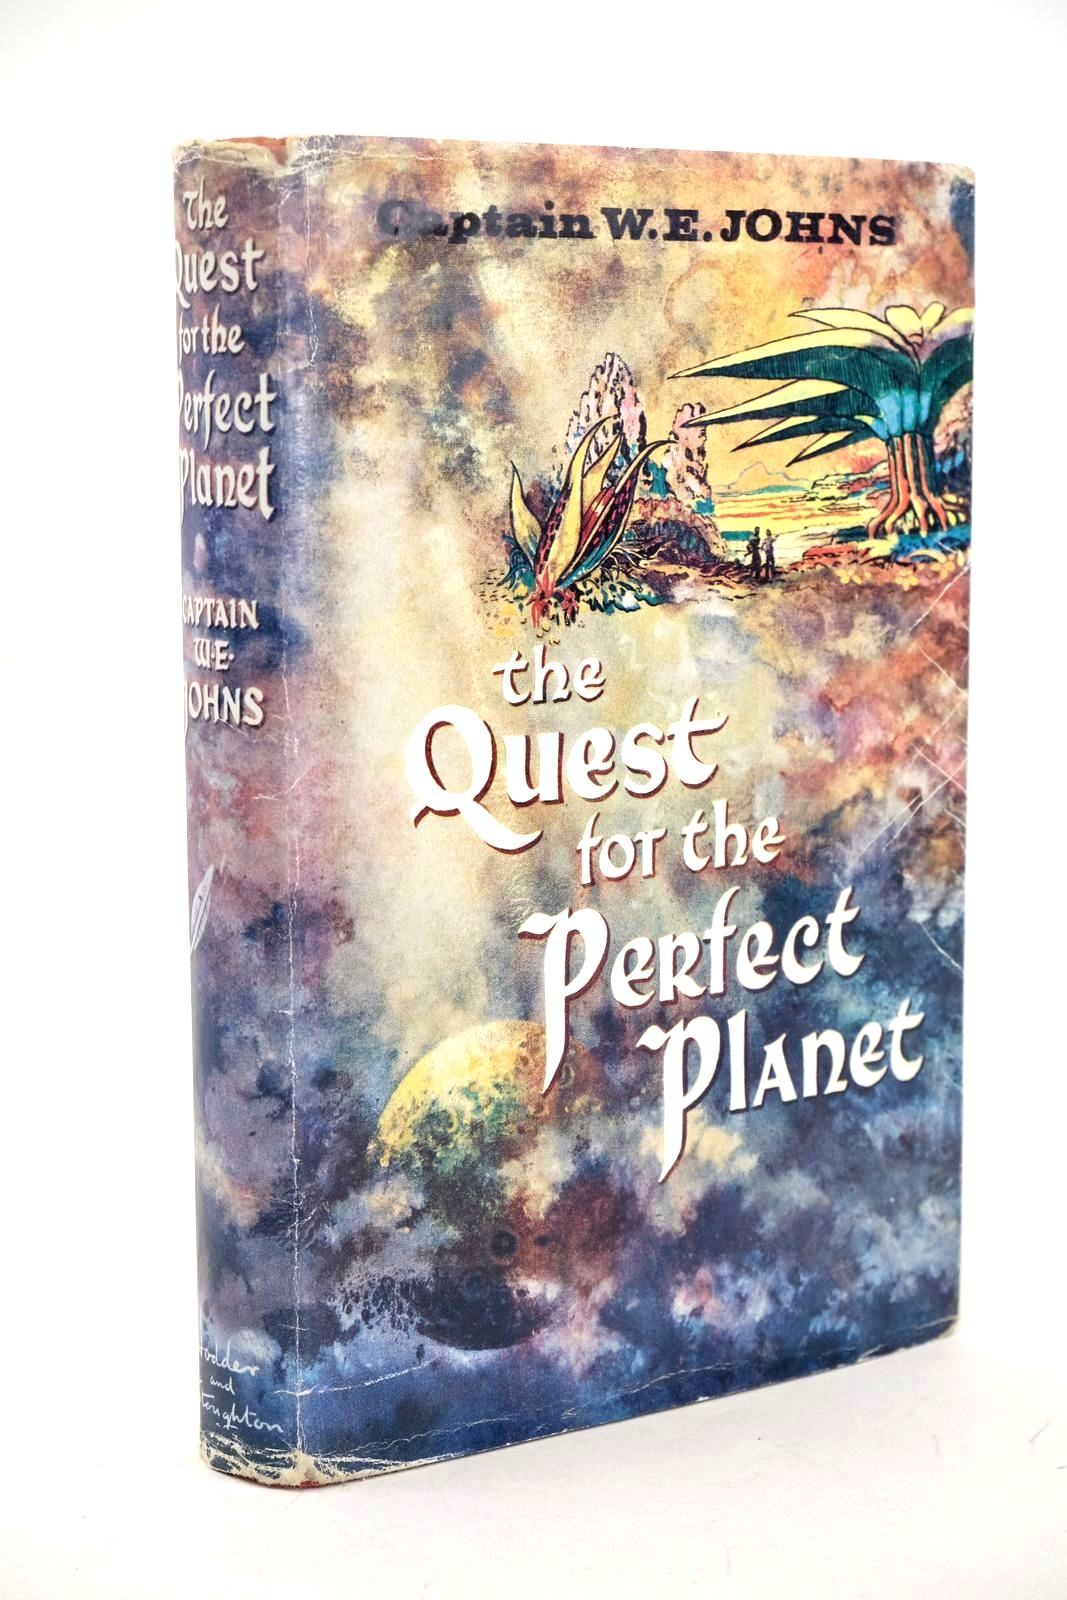 Photo of THE QUEST FOR THE PERFECT PLANET written by Johns, W.E. illustrated by Stead,  published by Hodder &amp; Stoughton (STOCK CODE: 1326598)  for sale by Stella & Rose's Books